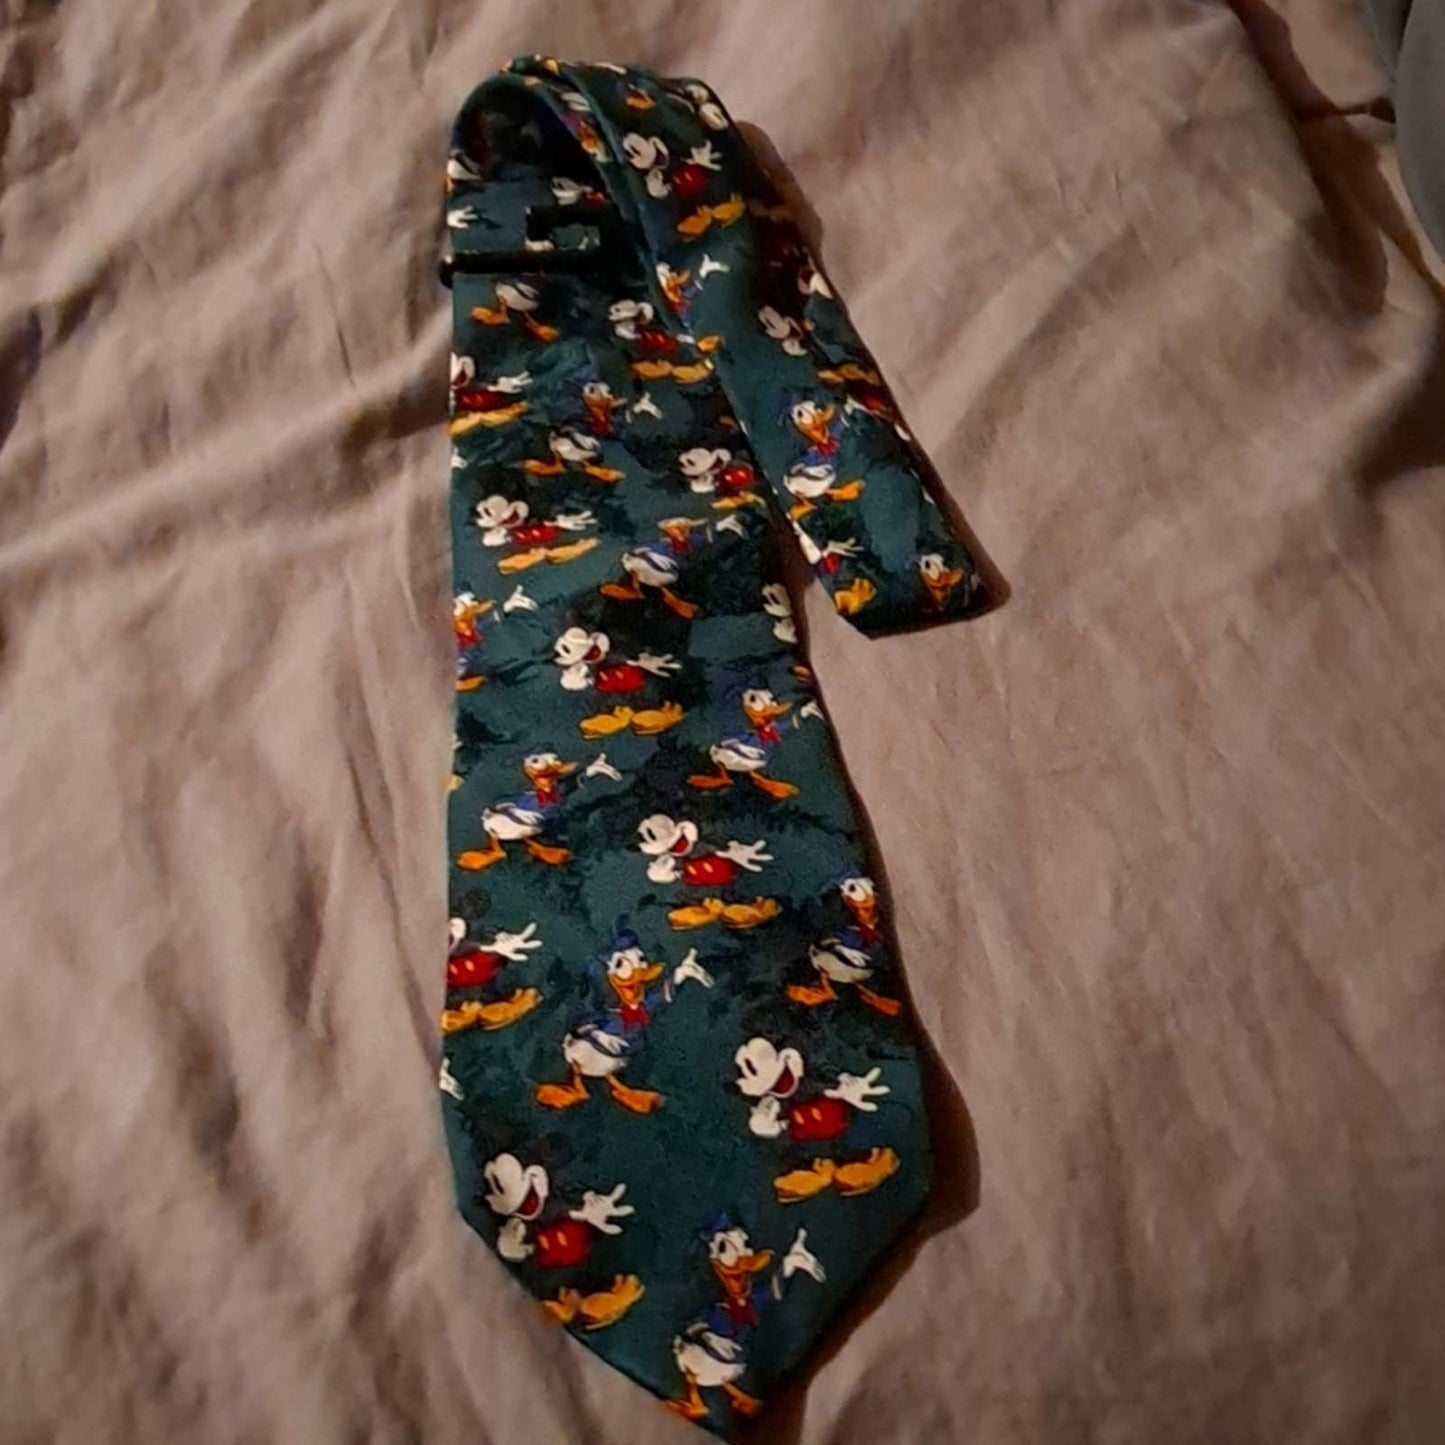 Mickey & Donald tie. Colorful. New.